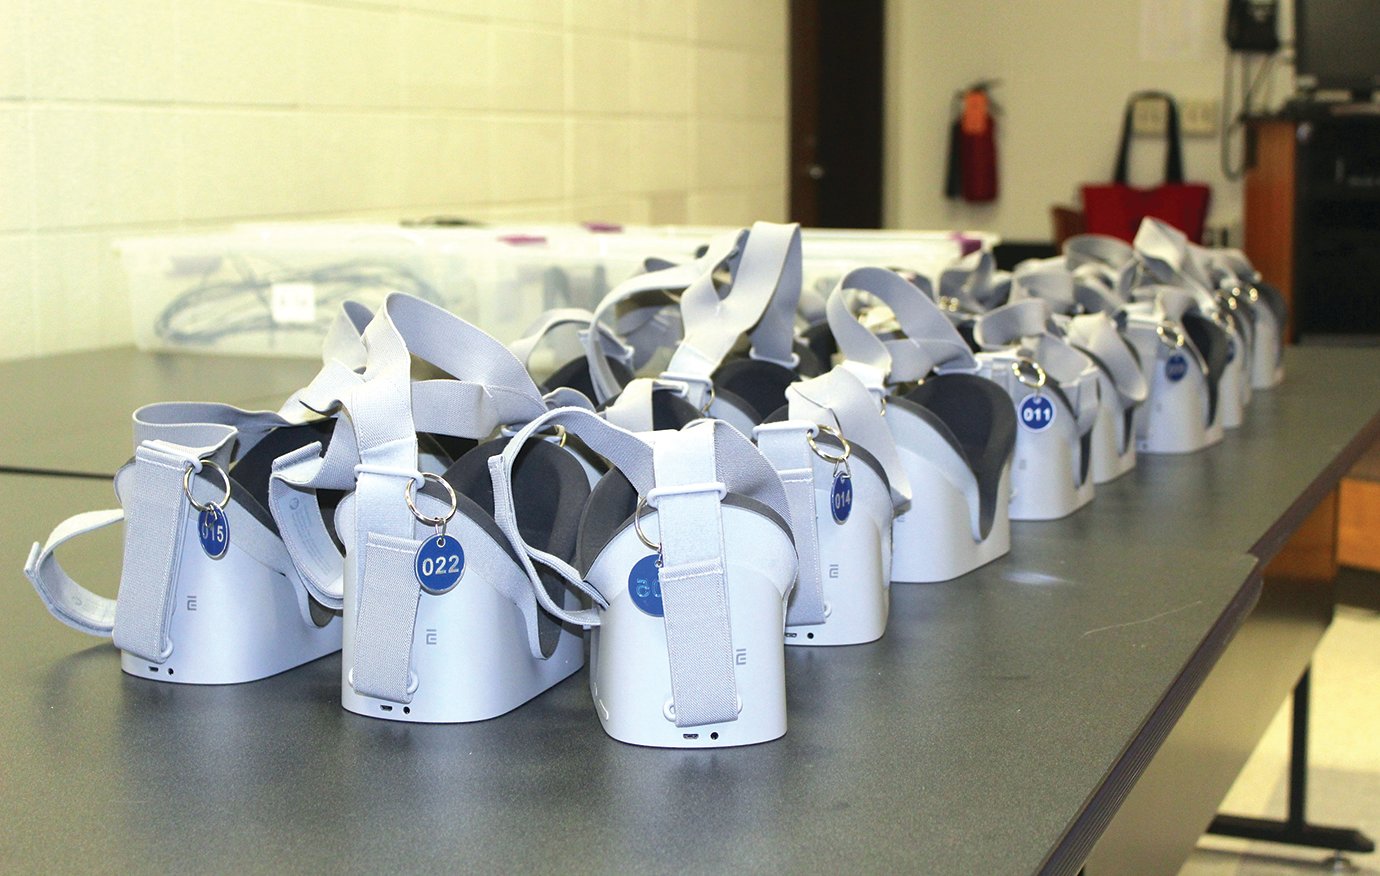 Several sets of Google Goggles await students and administrators who took part in the Eva Education Program on Monday at Southmont High School. Representatives of WFYI Indianapolis and CANDLES Holocaust Museum and Education Center in Terre Haute are traveling to high schools around the state with the visual tech to educate students about the Holocaust.